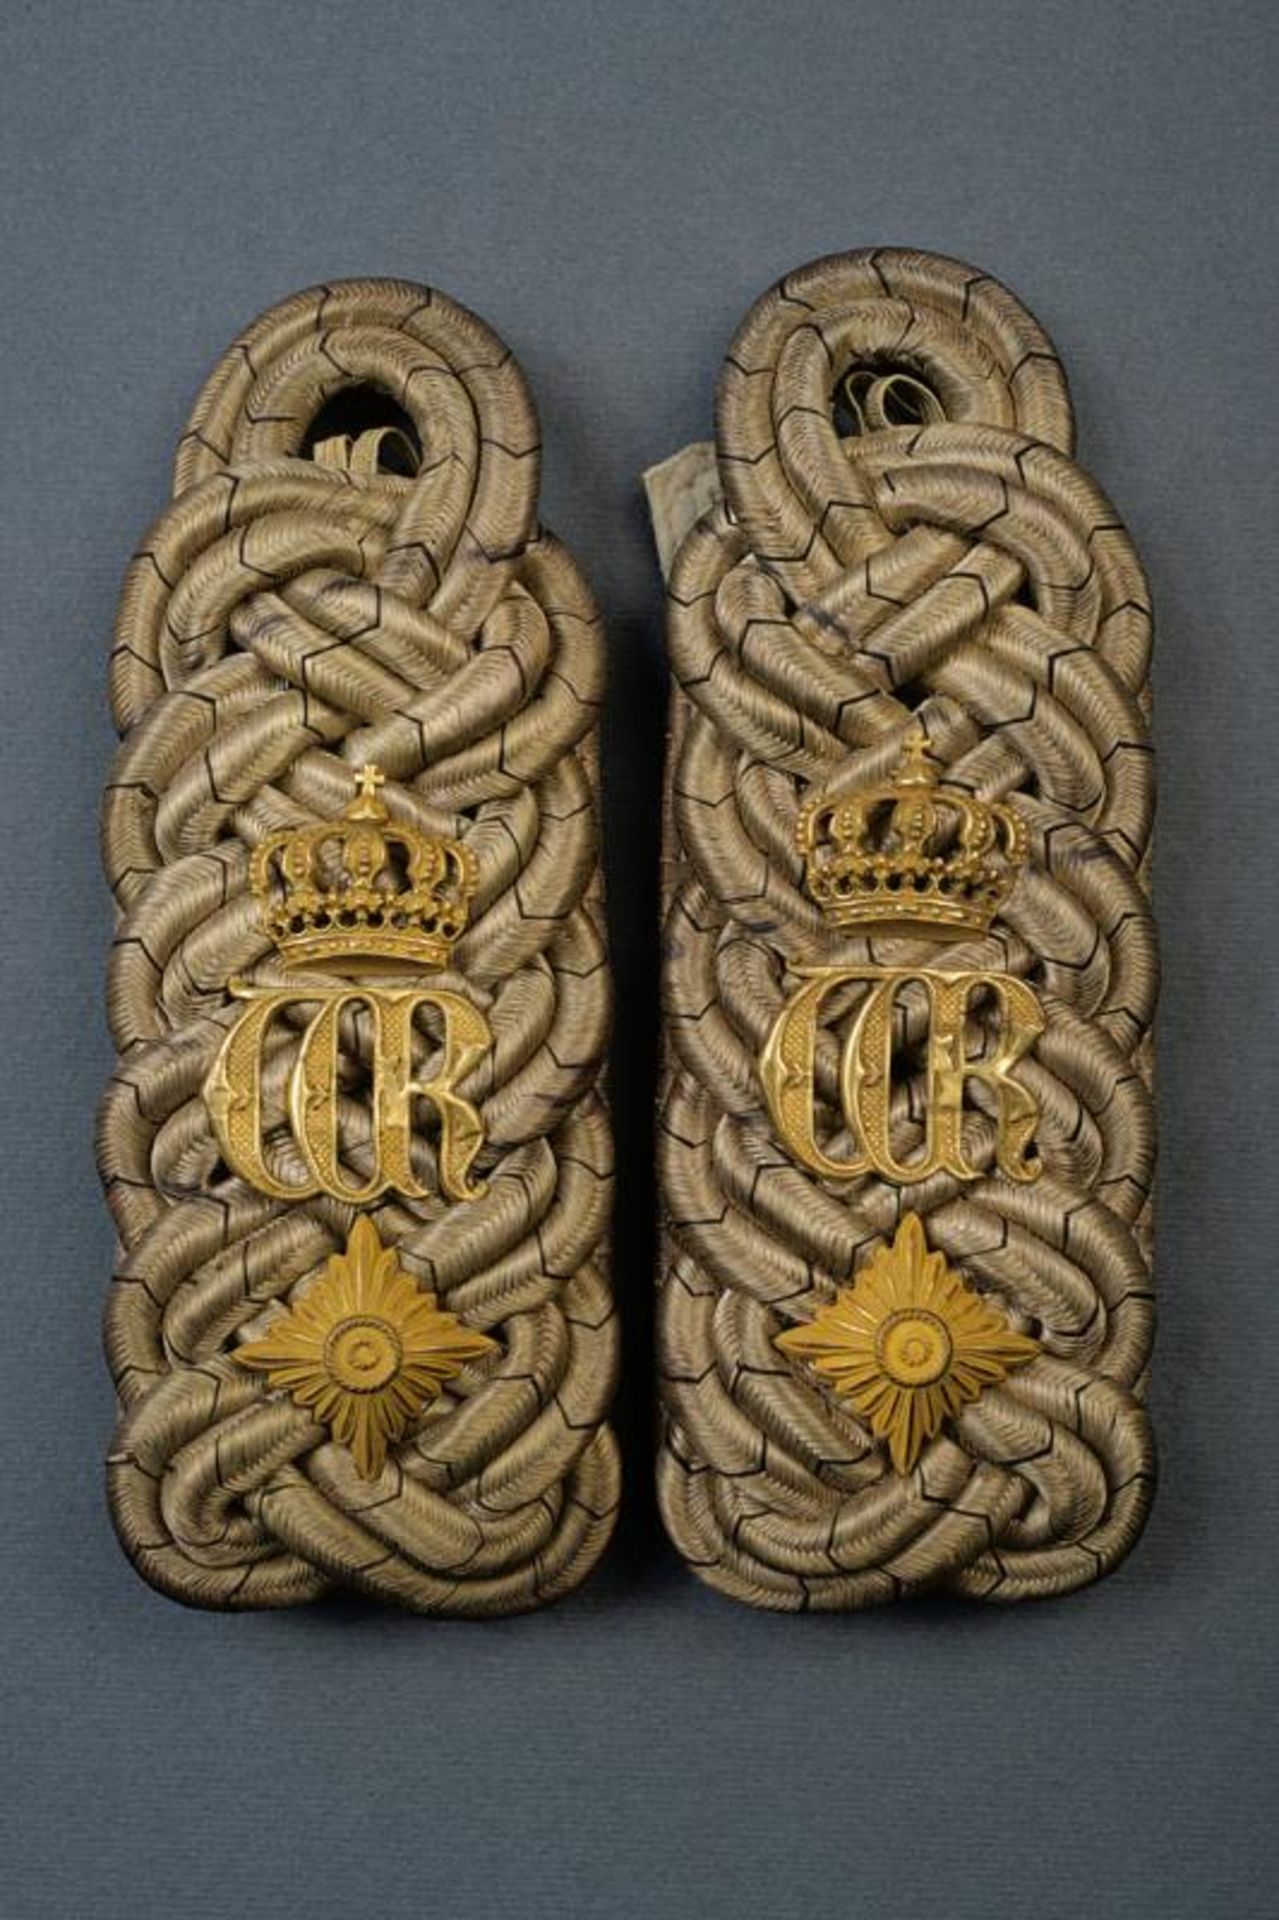 A pair of a high ranked state official's shoulder boards